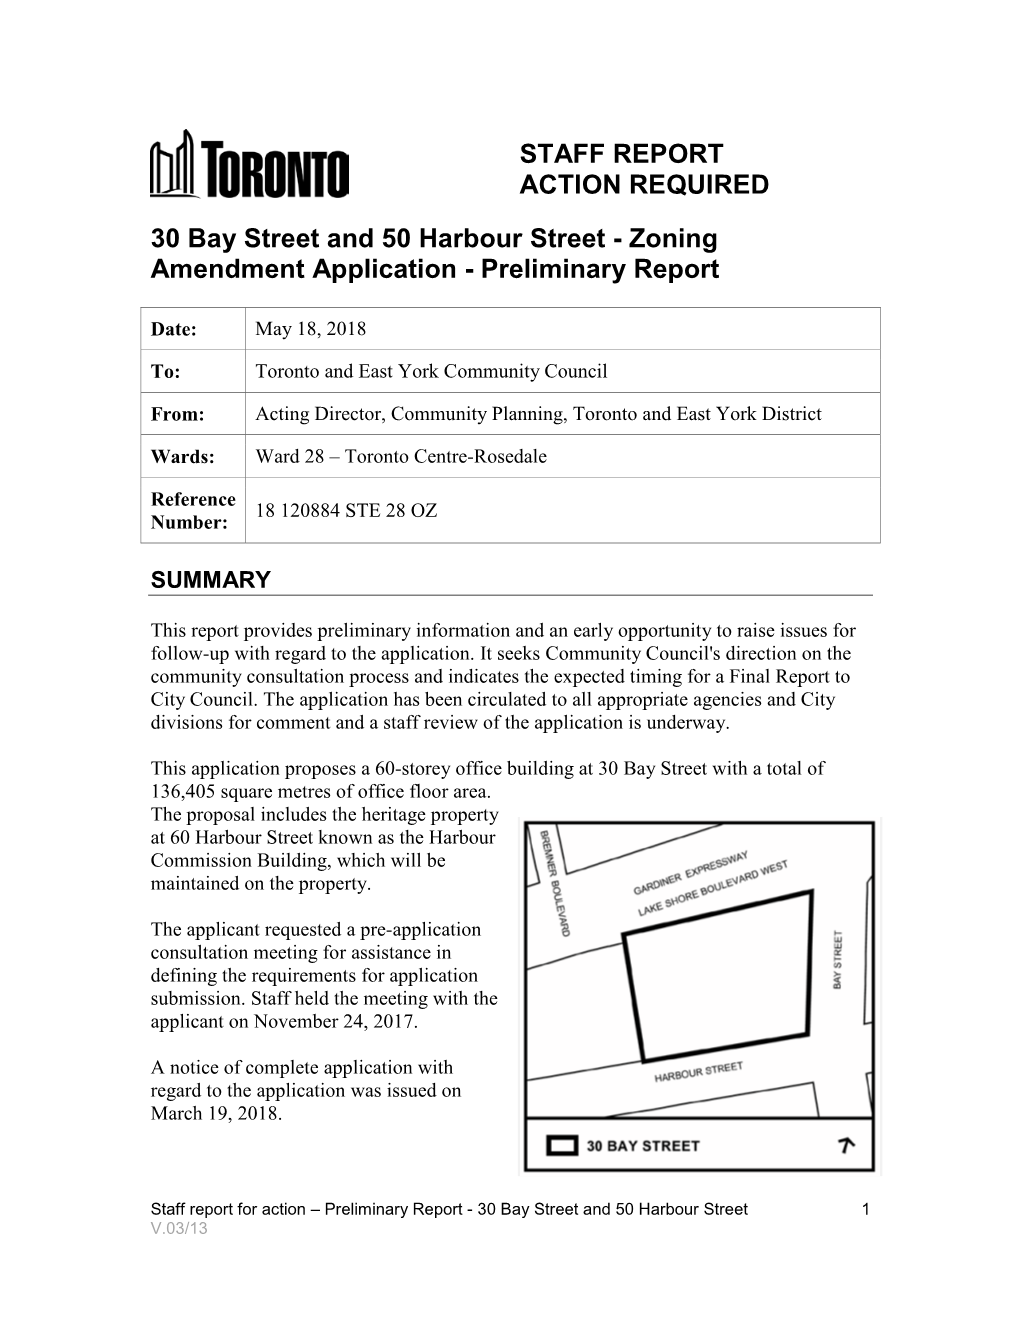 30 Bay Street and 50 Harbour Street - Zoning Amendment Application - Preliminary Report